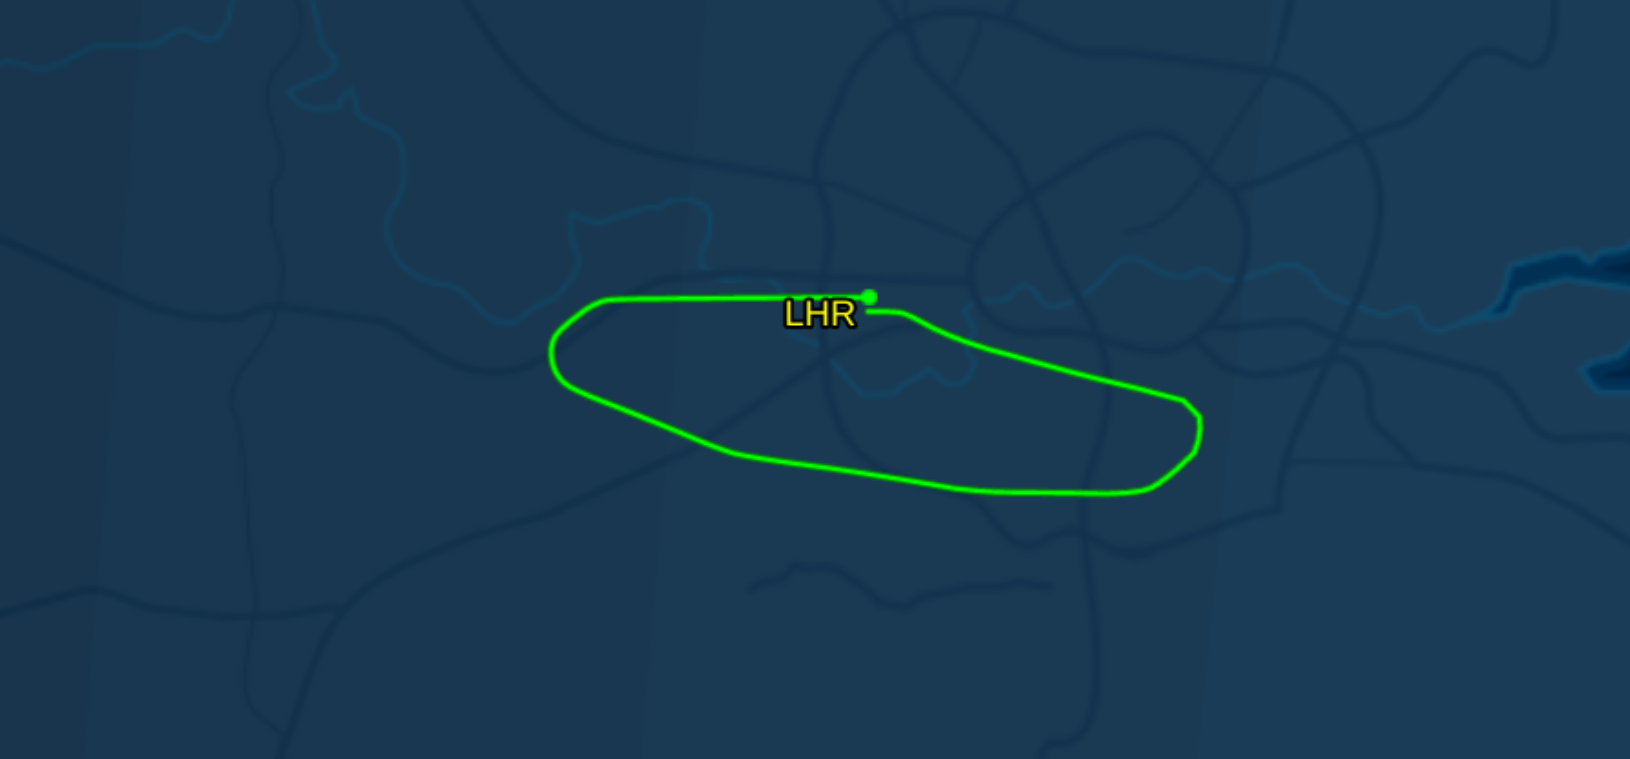 The BA flight returned to Heathrow shortly after takeoff